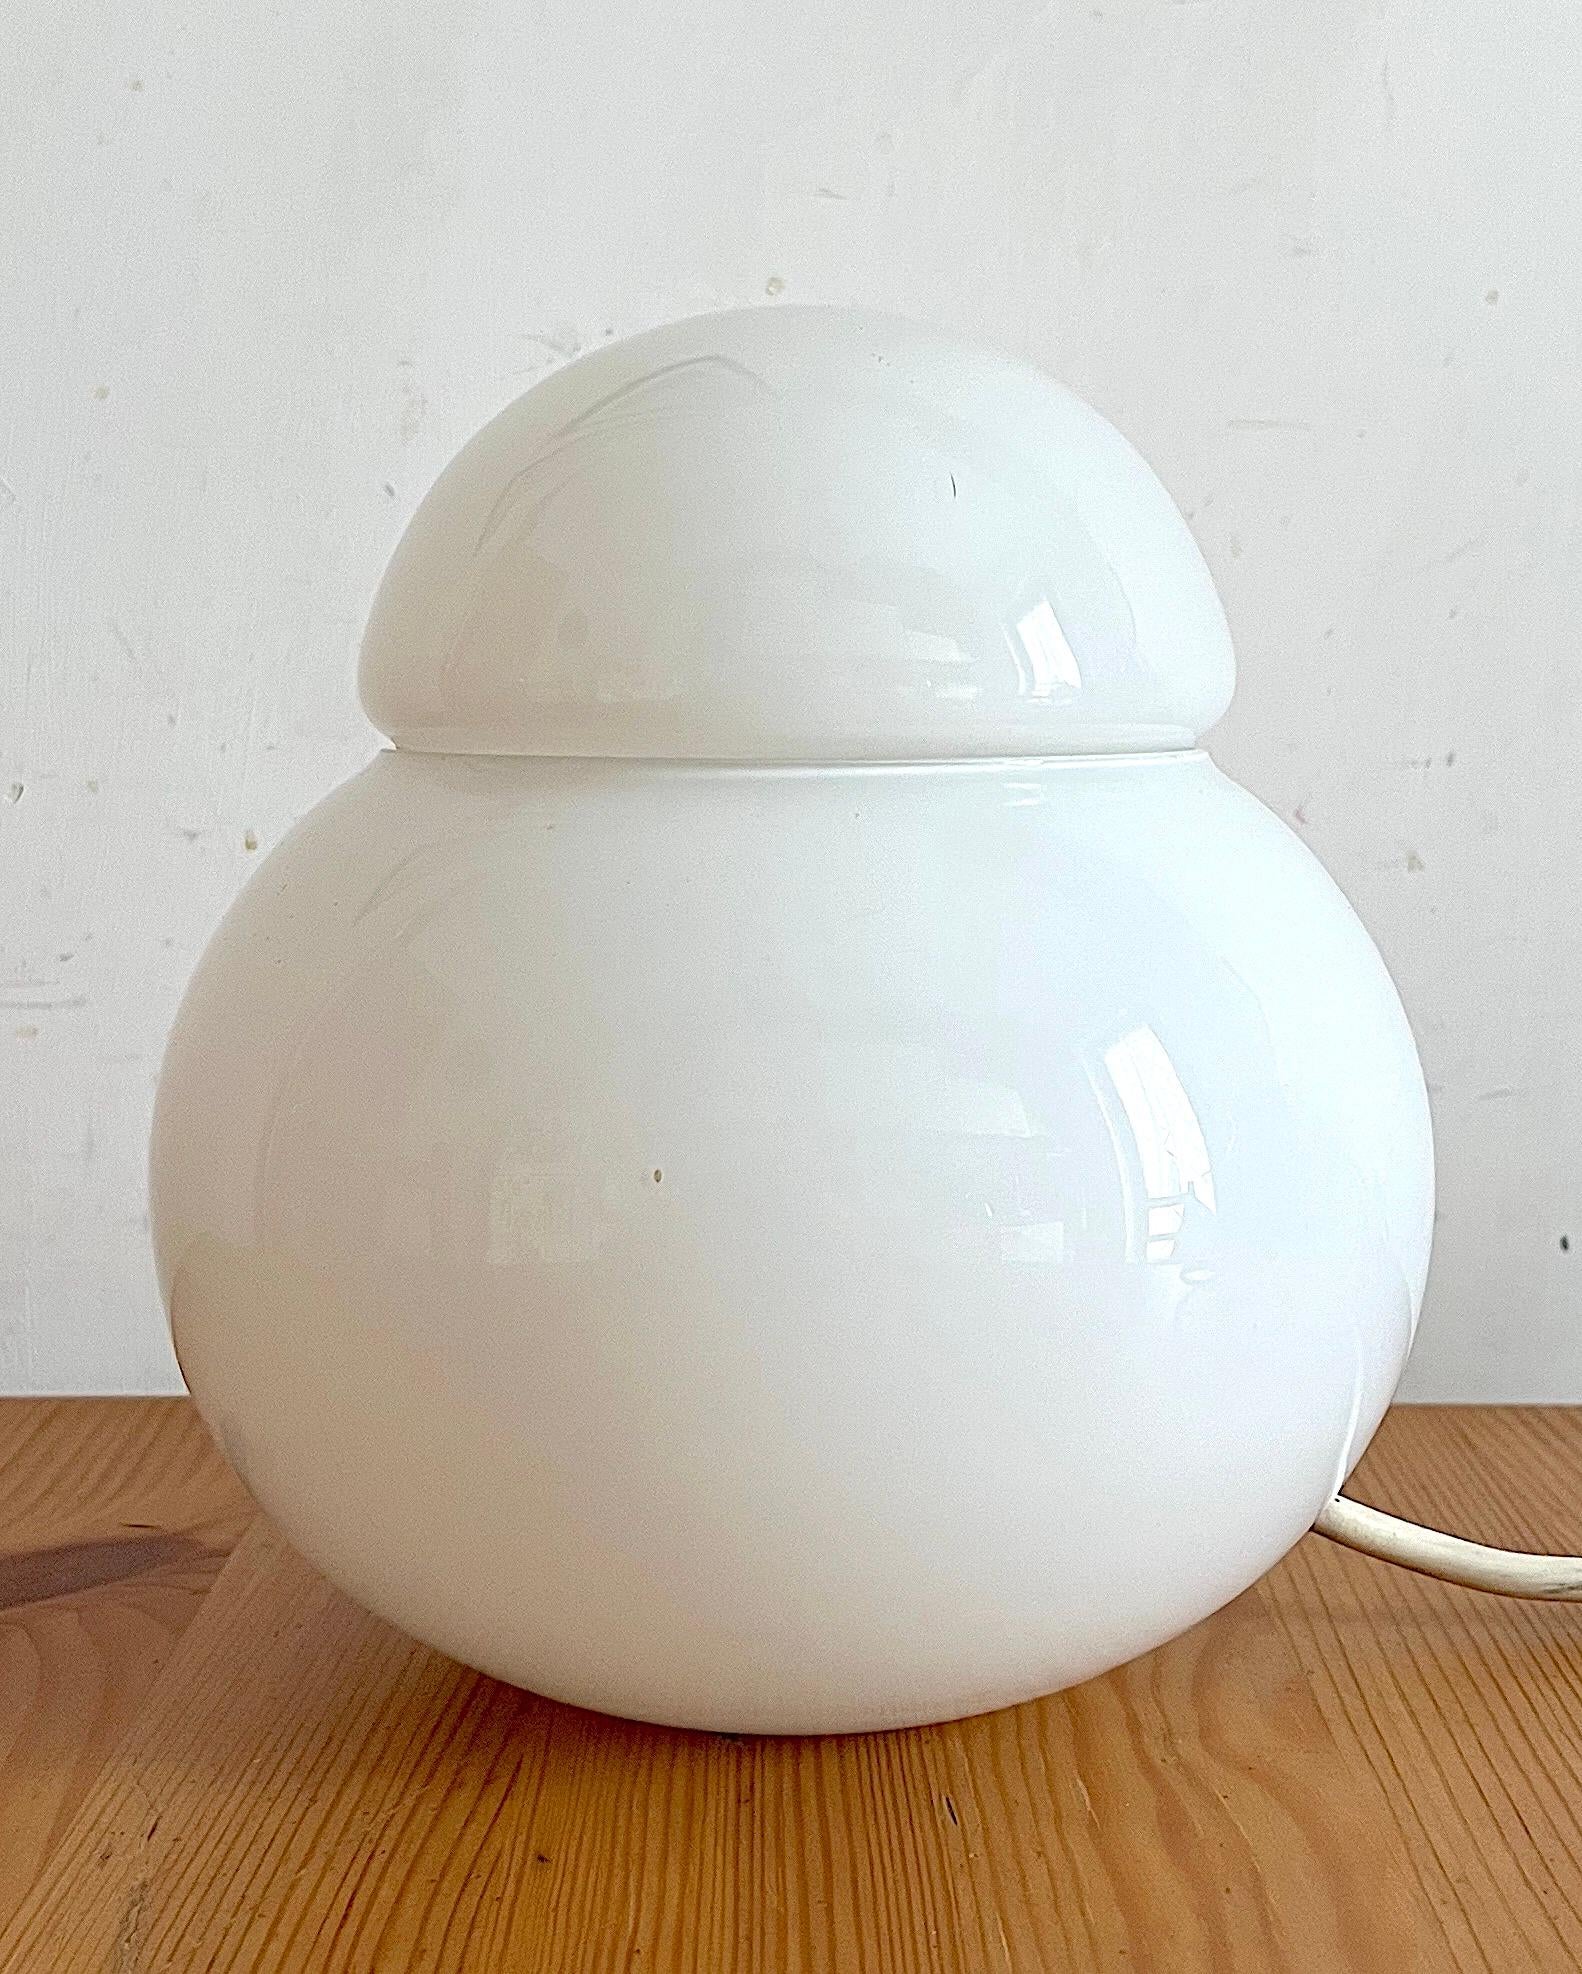 Daruma was designed by Sergio Asti in 1968 and produced by Candle, now Fontana Arte. The piece is made up of two white blown glasses. This object is exhibited at the Museum of Modern Art in New York thanks to its smooth and rigorous shape. This